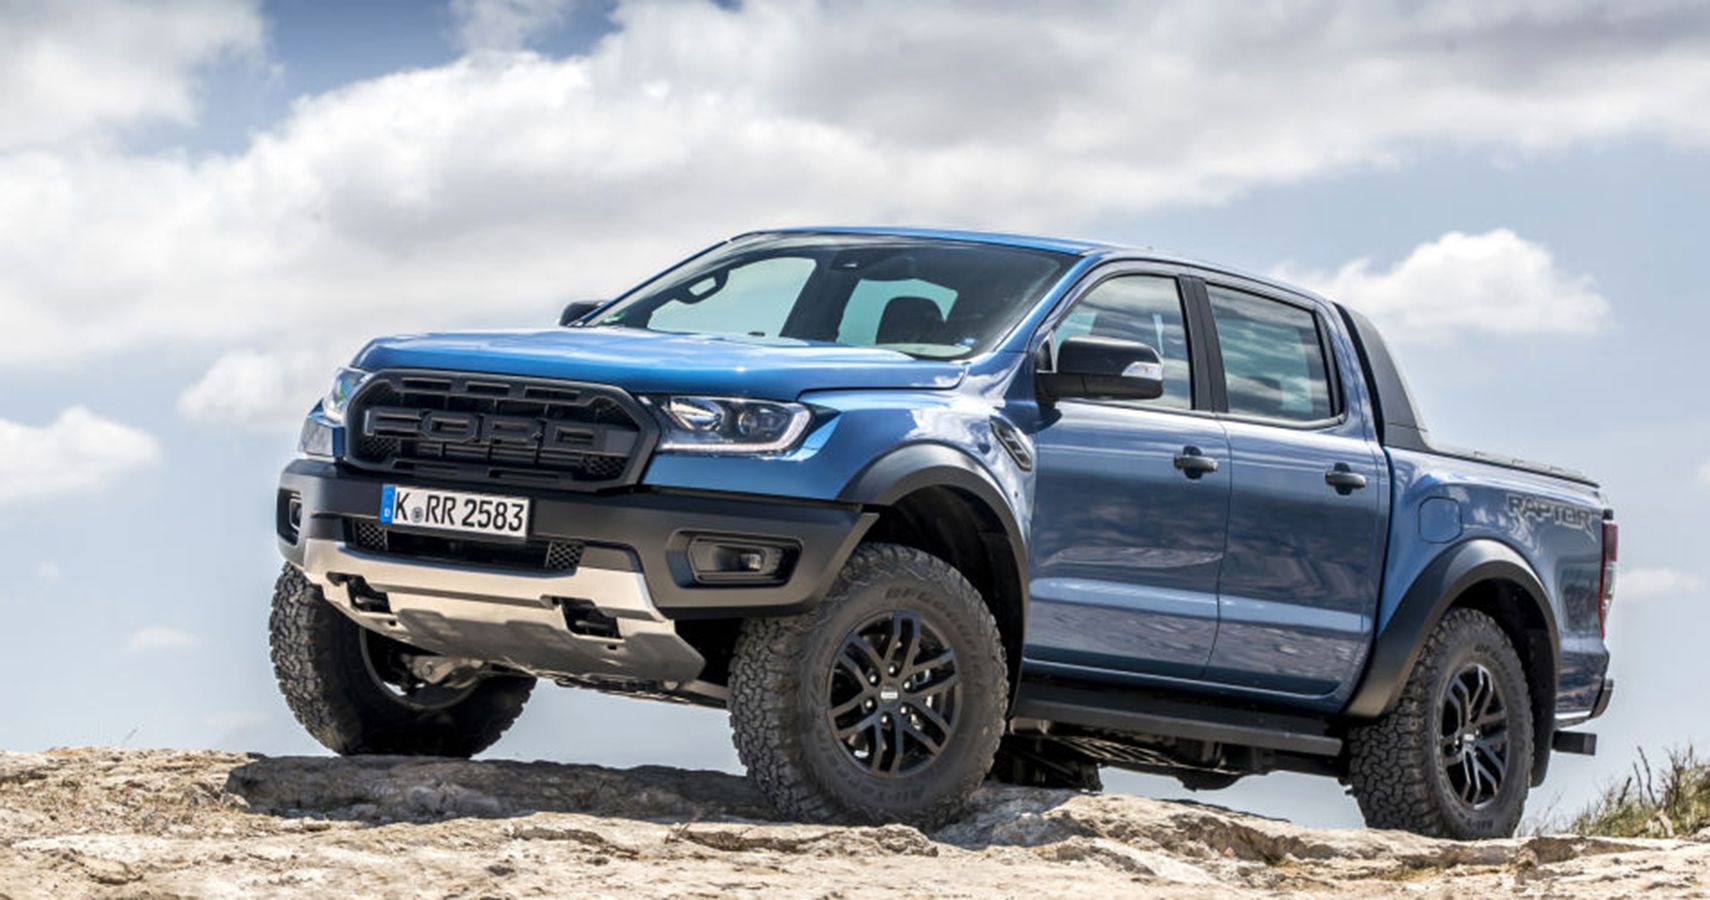 Ford Coyote V8 To Power Aussie 2020 Ford Ranger Raptor